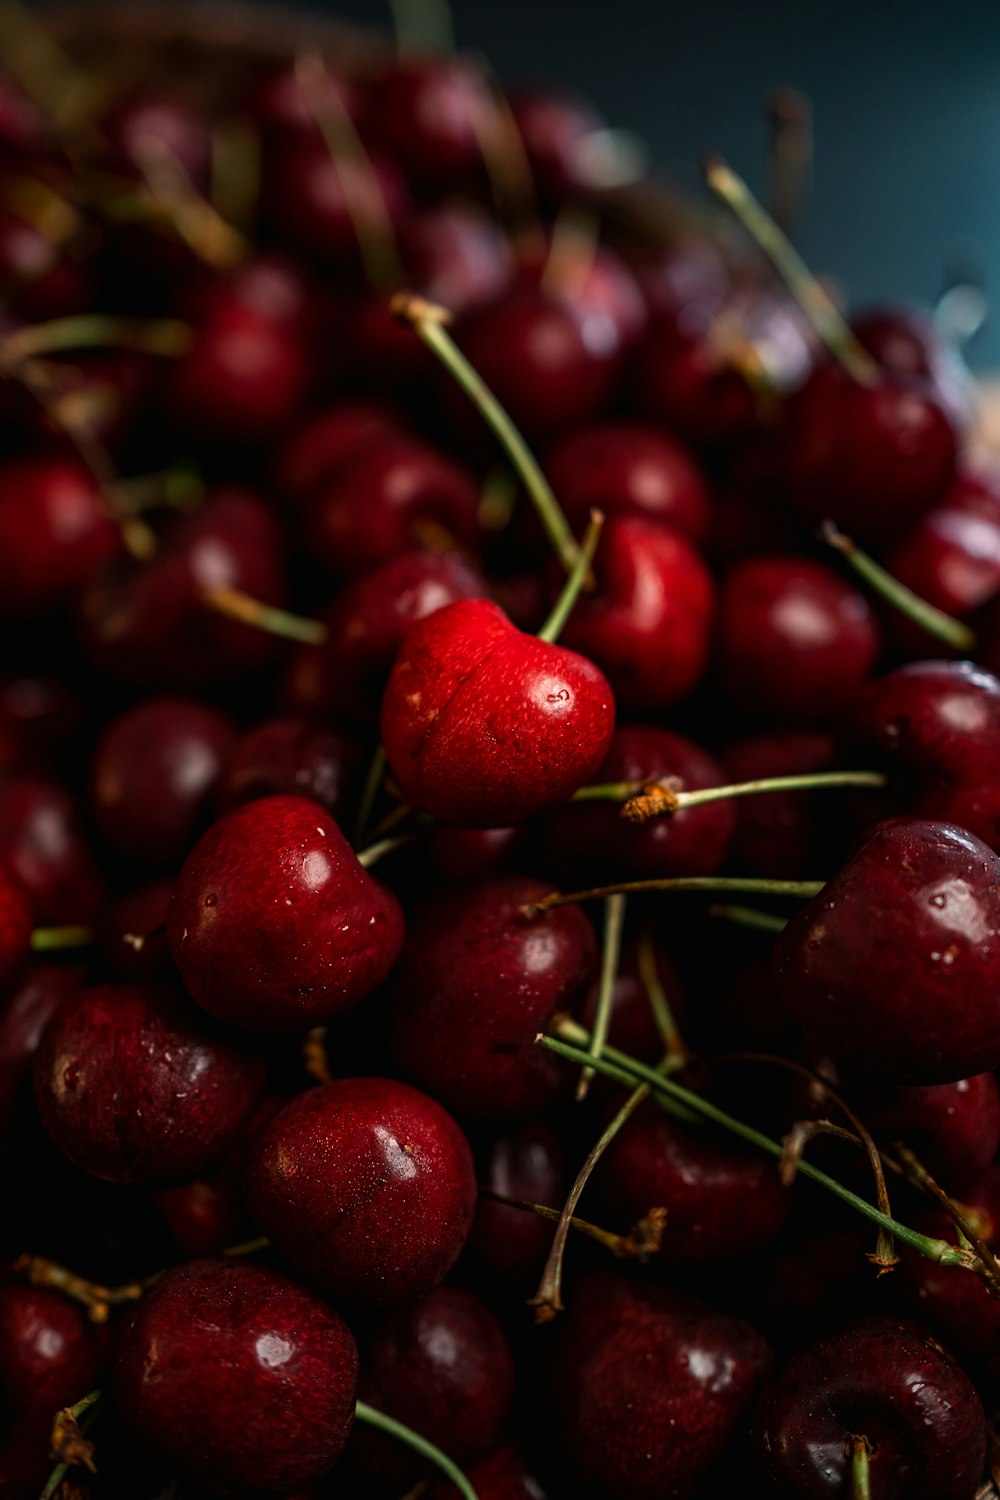 a pile of cherries